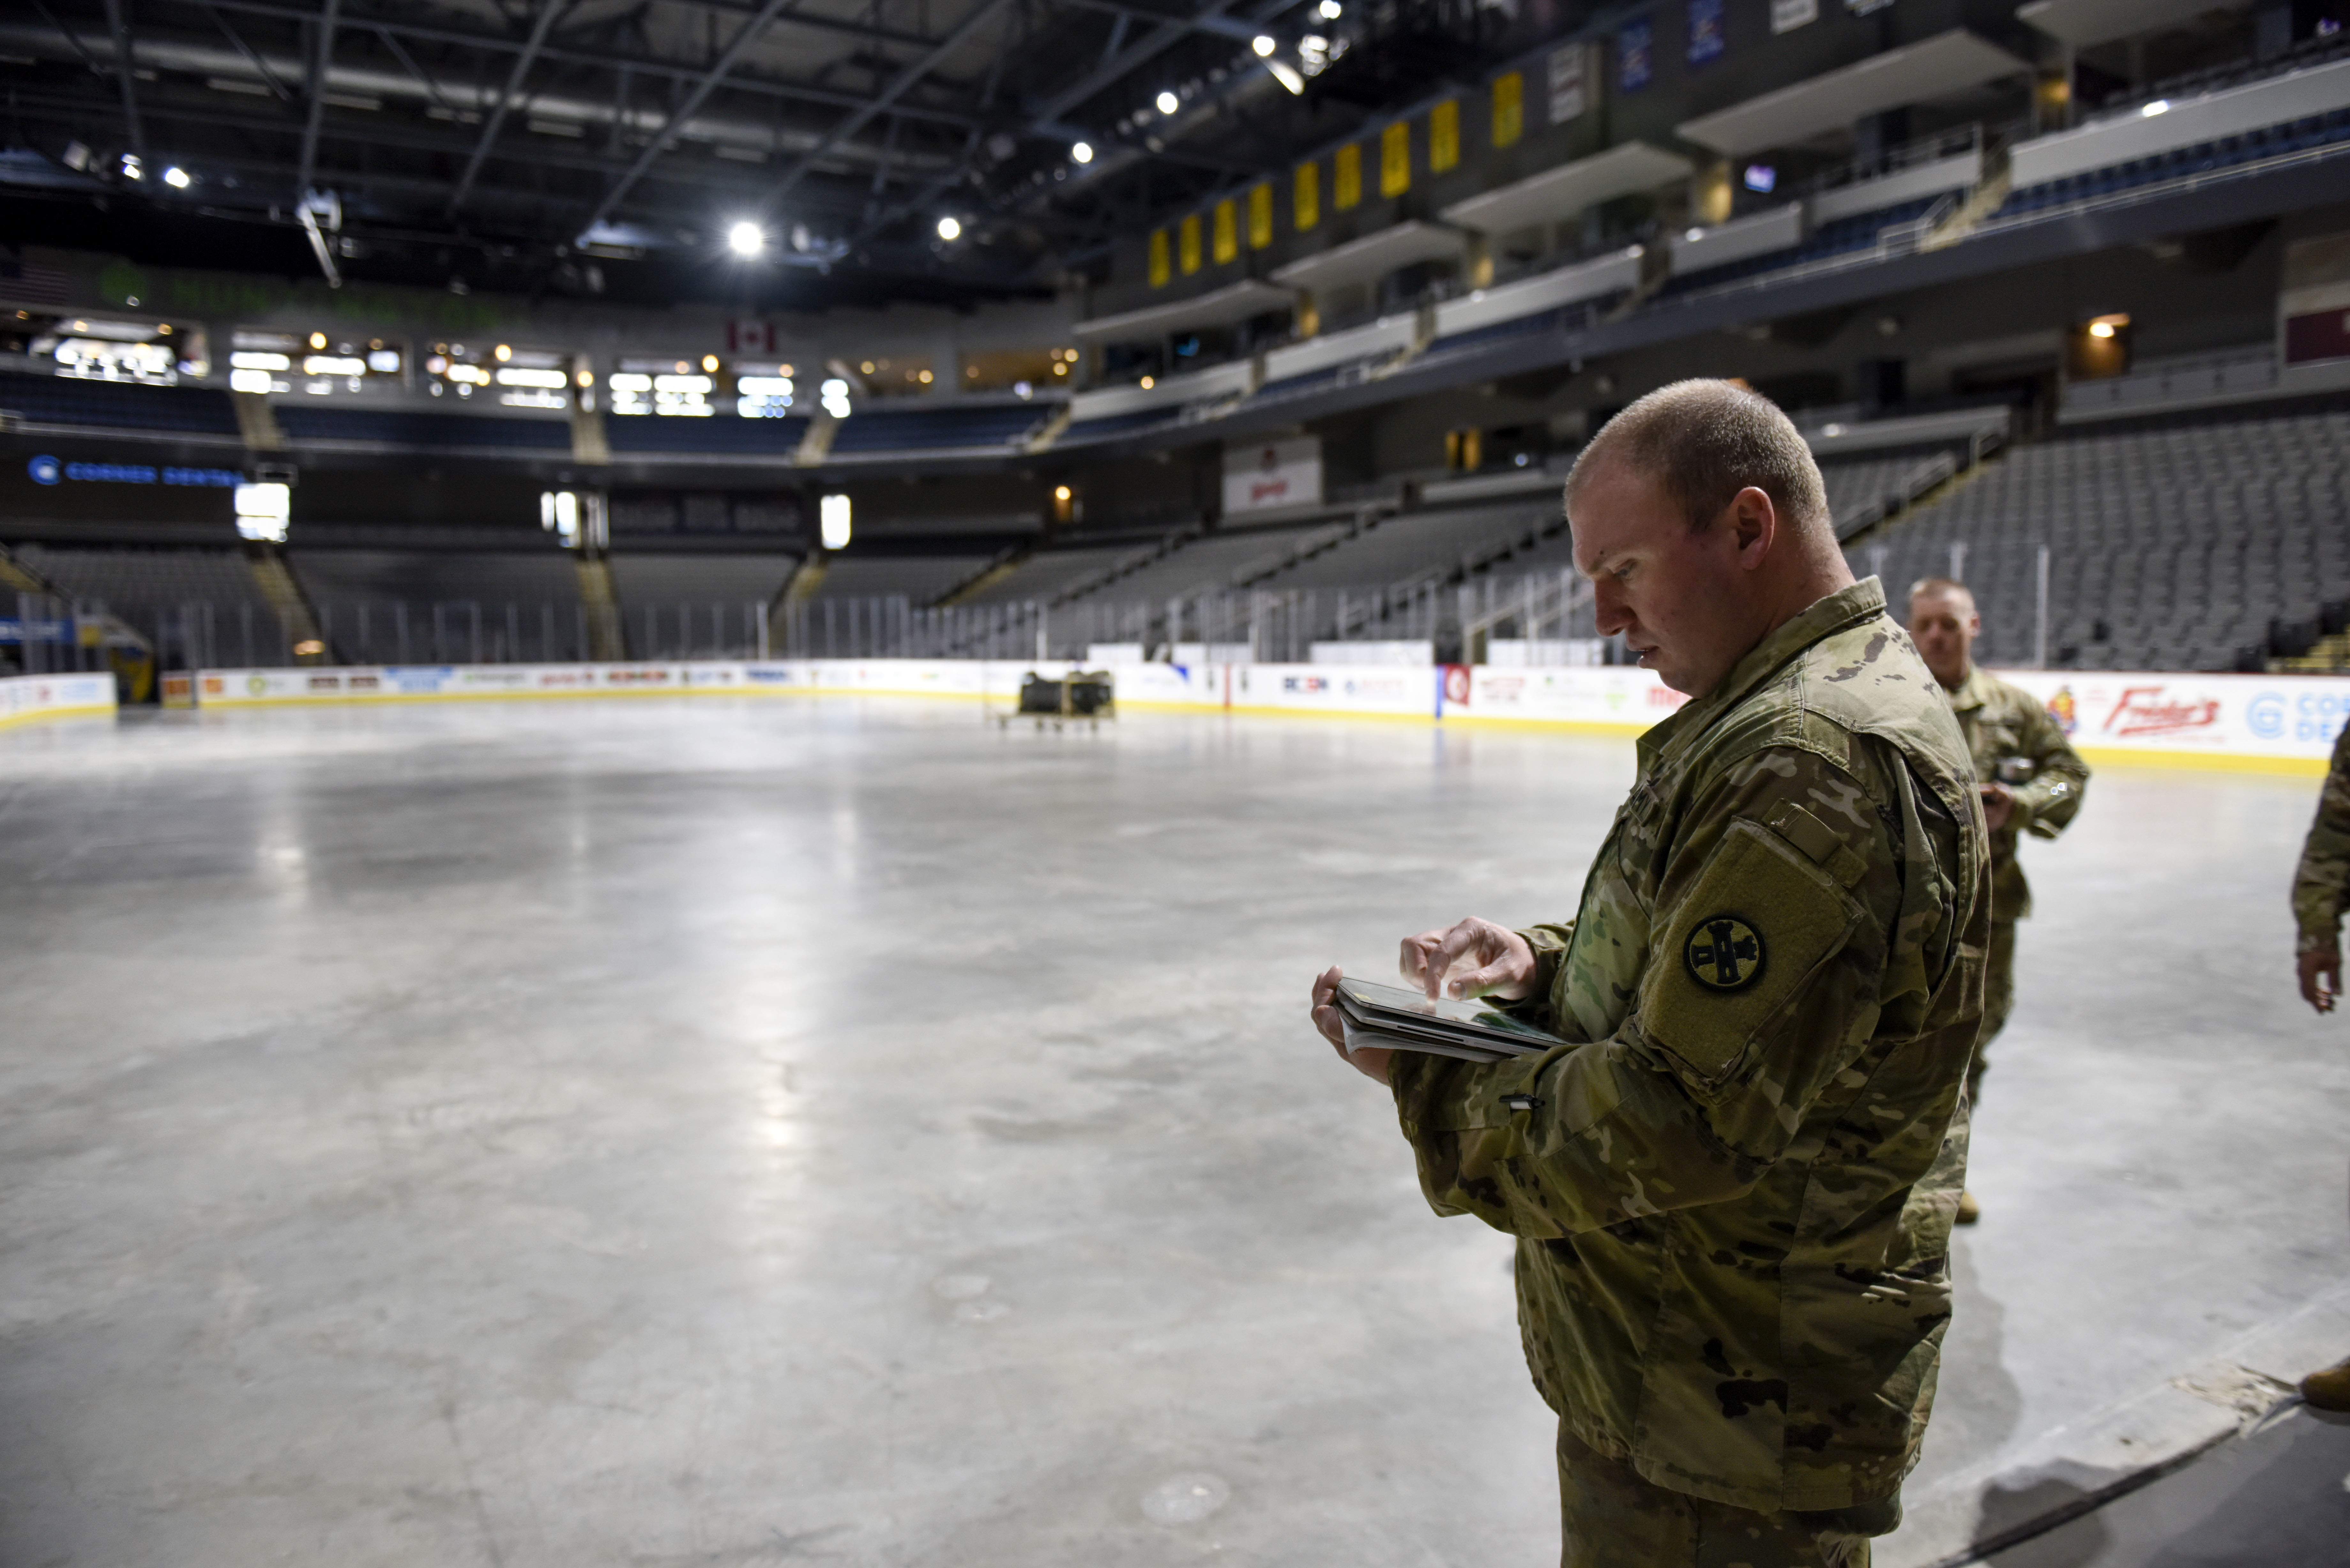 Guard members inputs info on hand-held device in hockey arena.